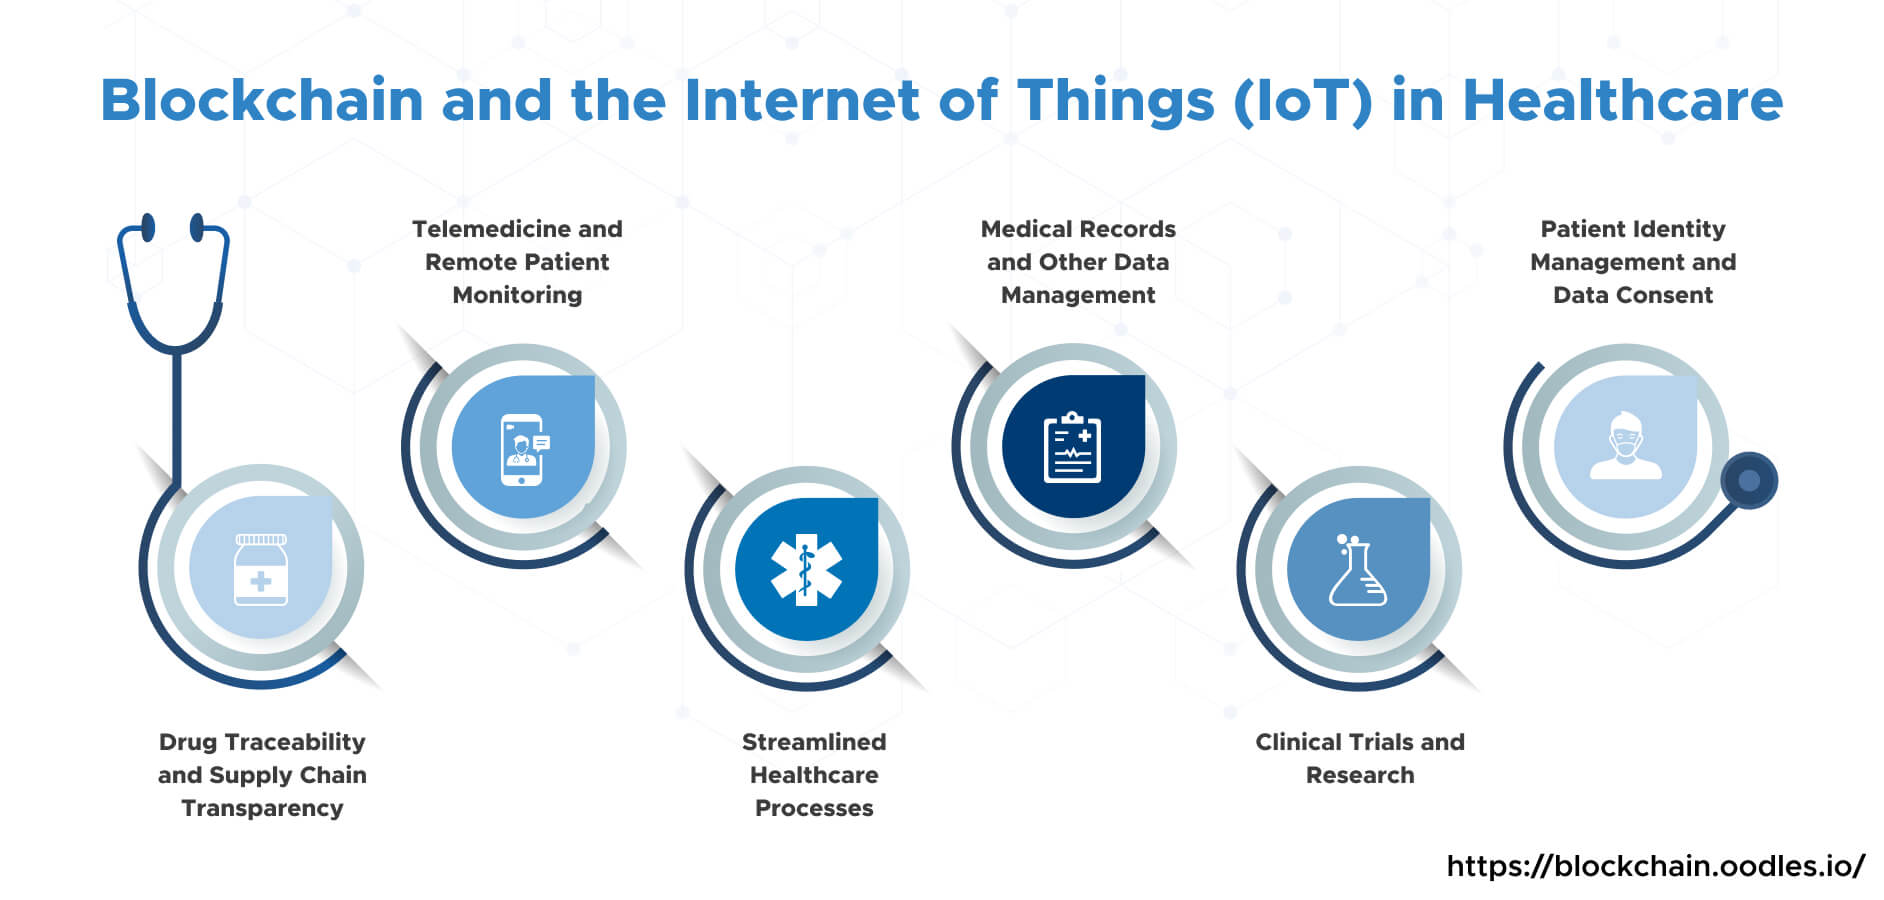 Blockchain and Internet of Things (IoT) in Healthcare